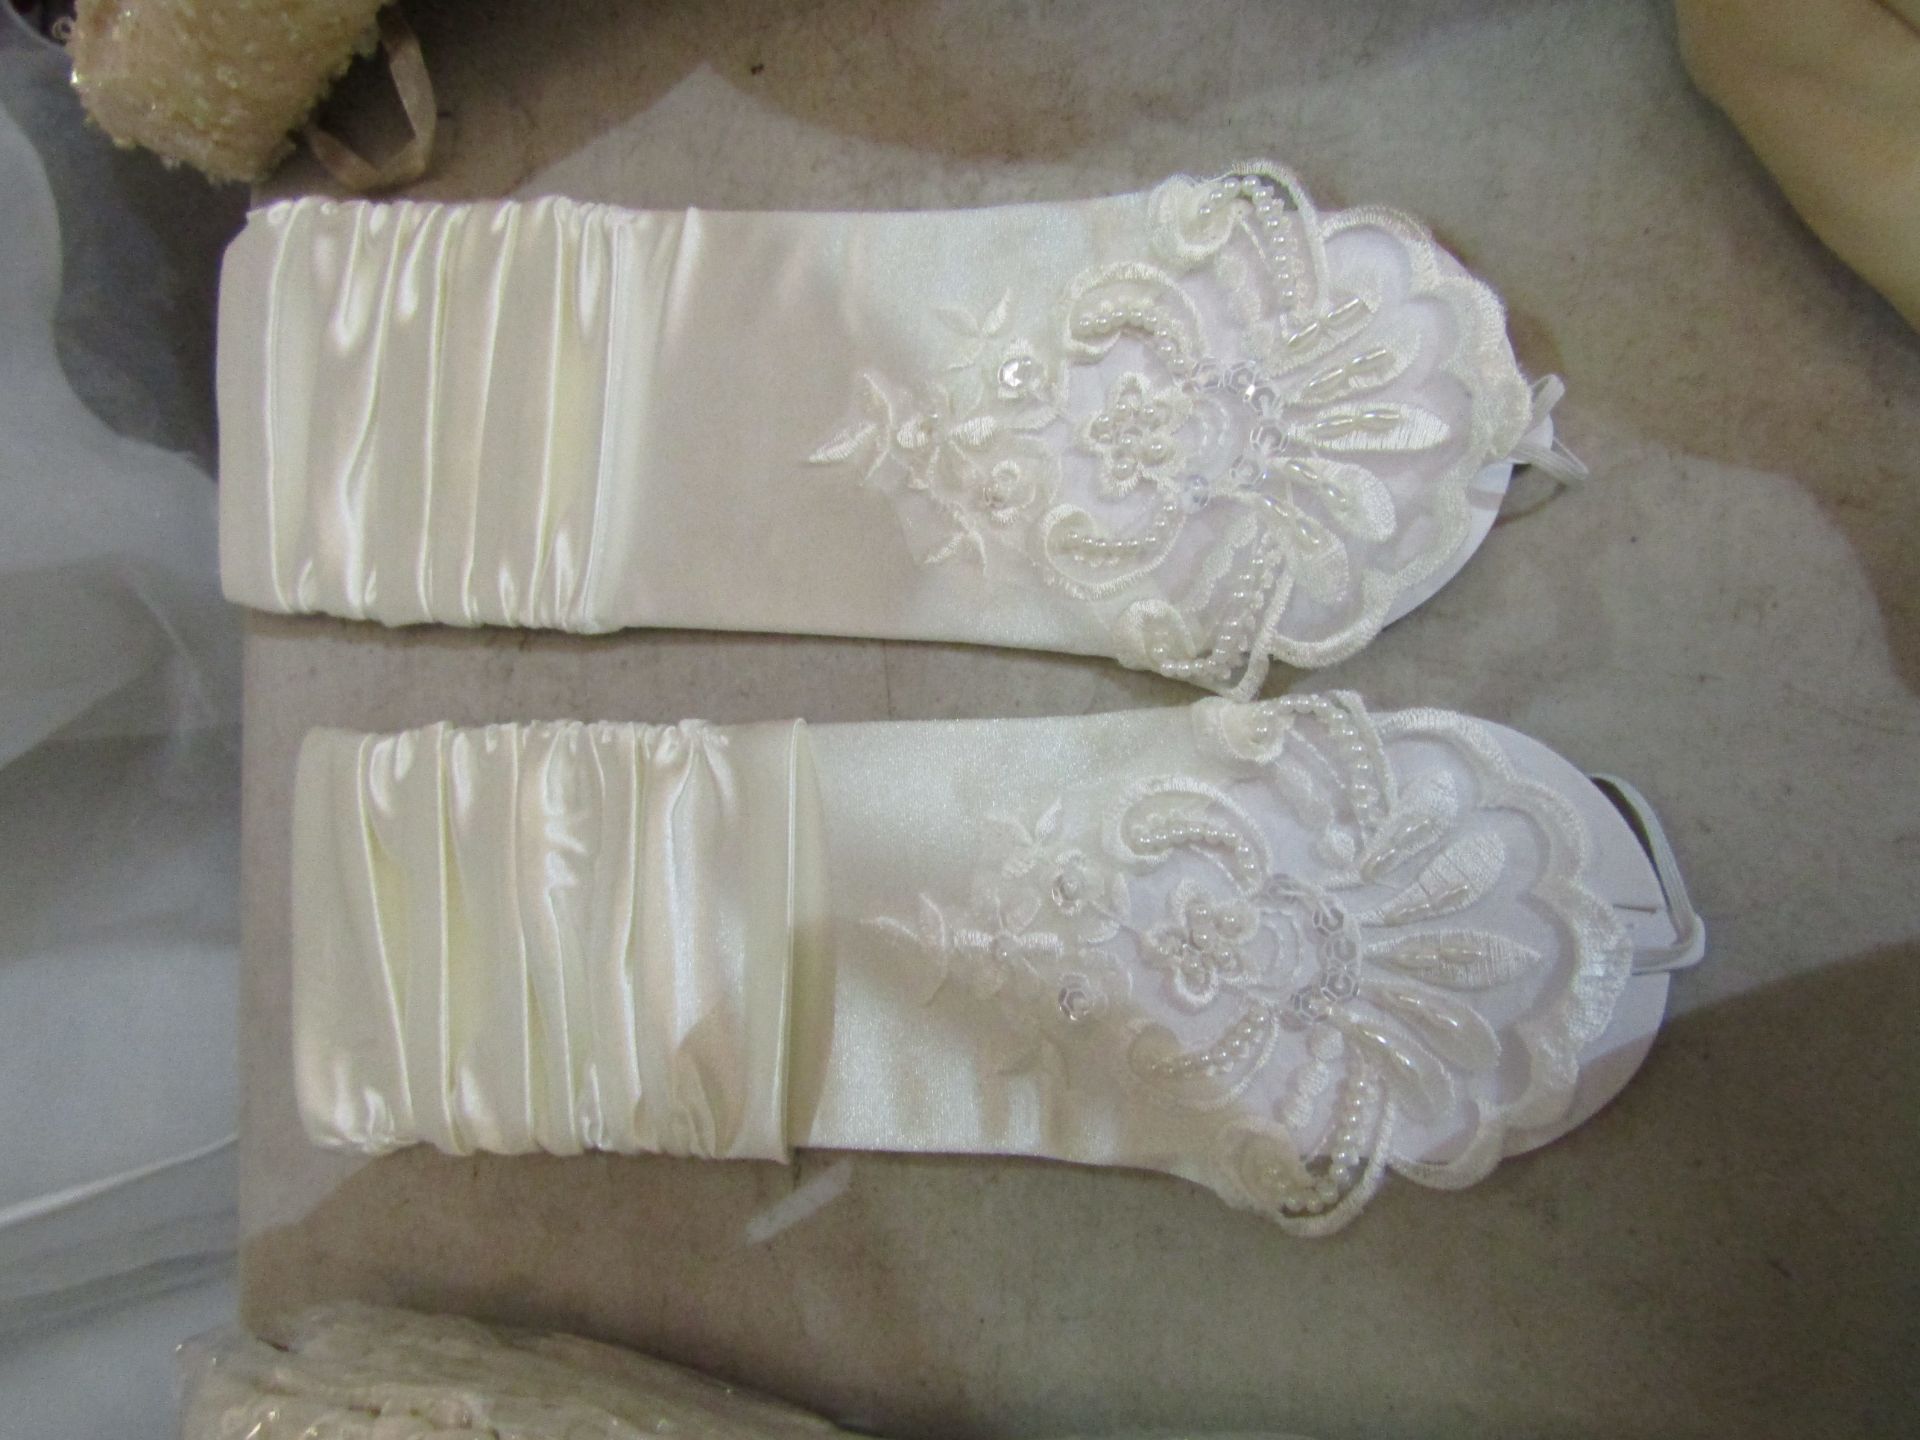 Approx 500 pieces of wedding shop stock to include wedding dresses, mother of the bride, dresses, - Image 24 of 108